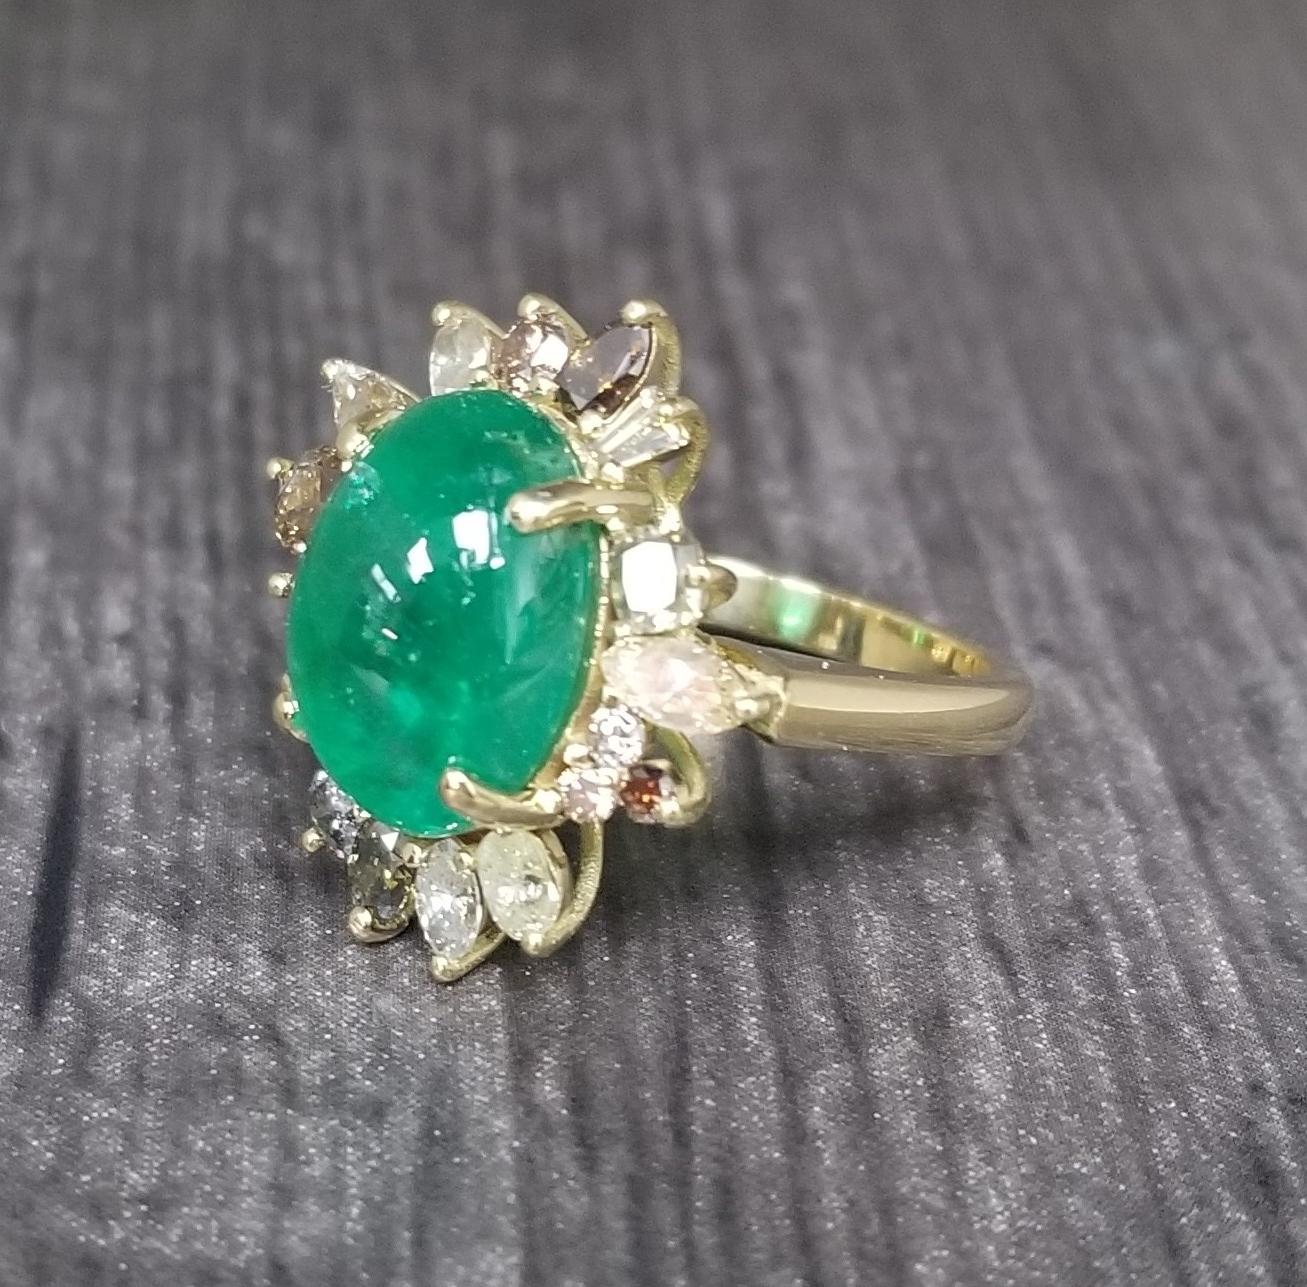 18k yellow gold ladies emerald and diamond ring containing, 1 cabochon cut emerald weighing 6.18cts. and 17 natural diamonds; color white, yellow, and brown, weighing 1.68cts.  This ring is a size 6.5 but we will size to fit for free.